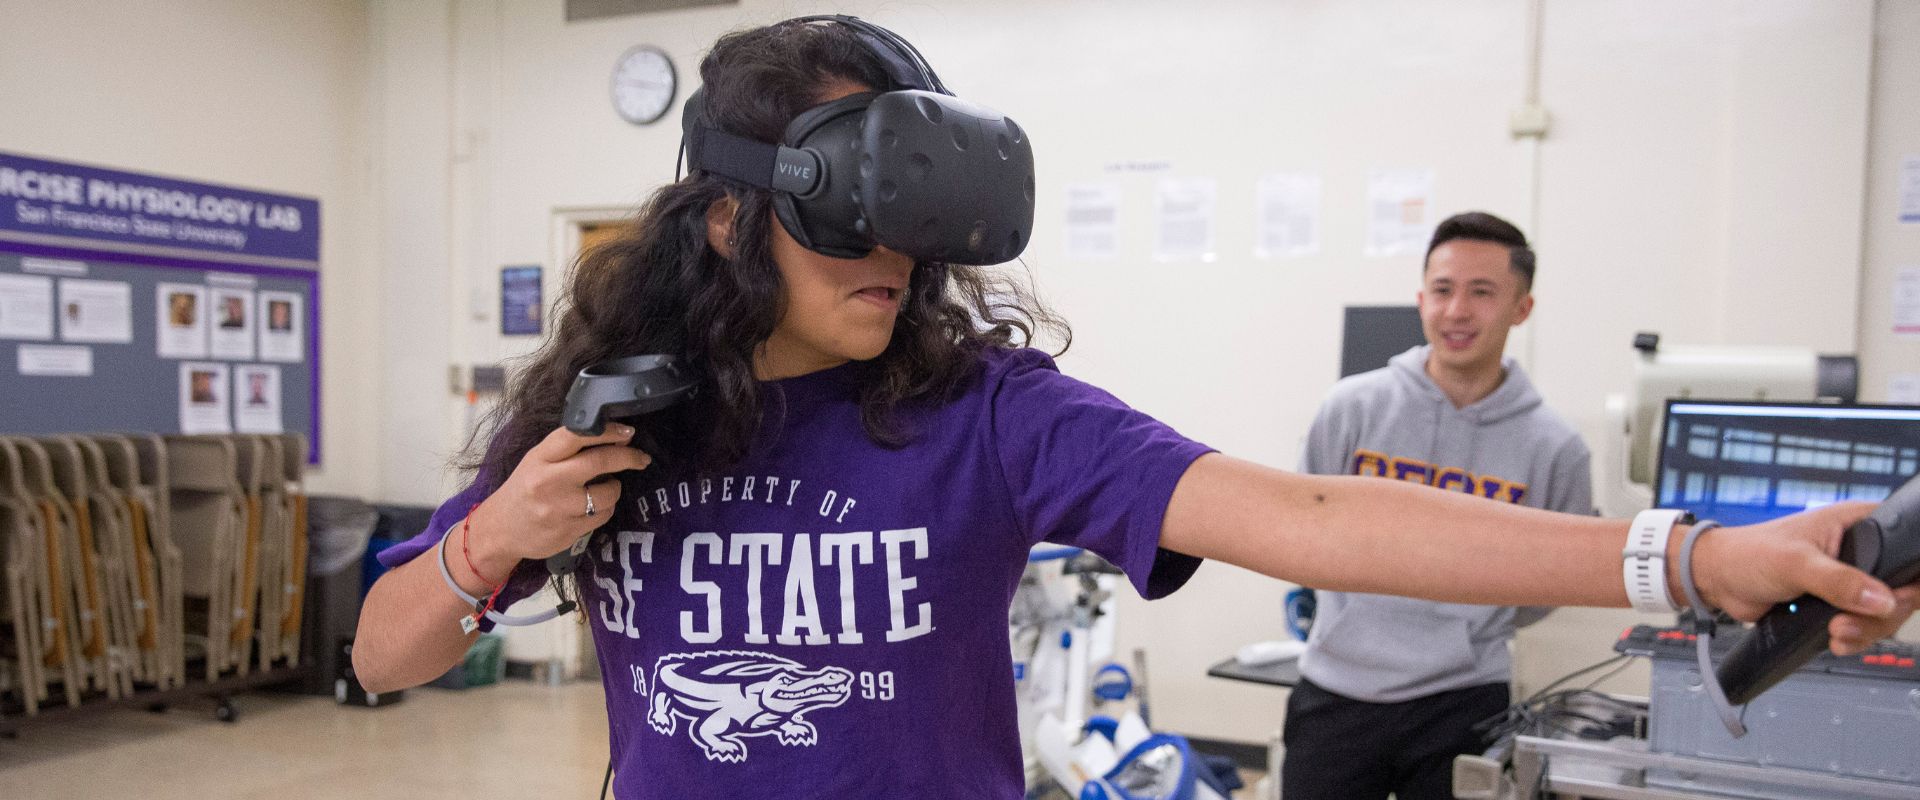 Student exercises in virtual reality while another watches